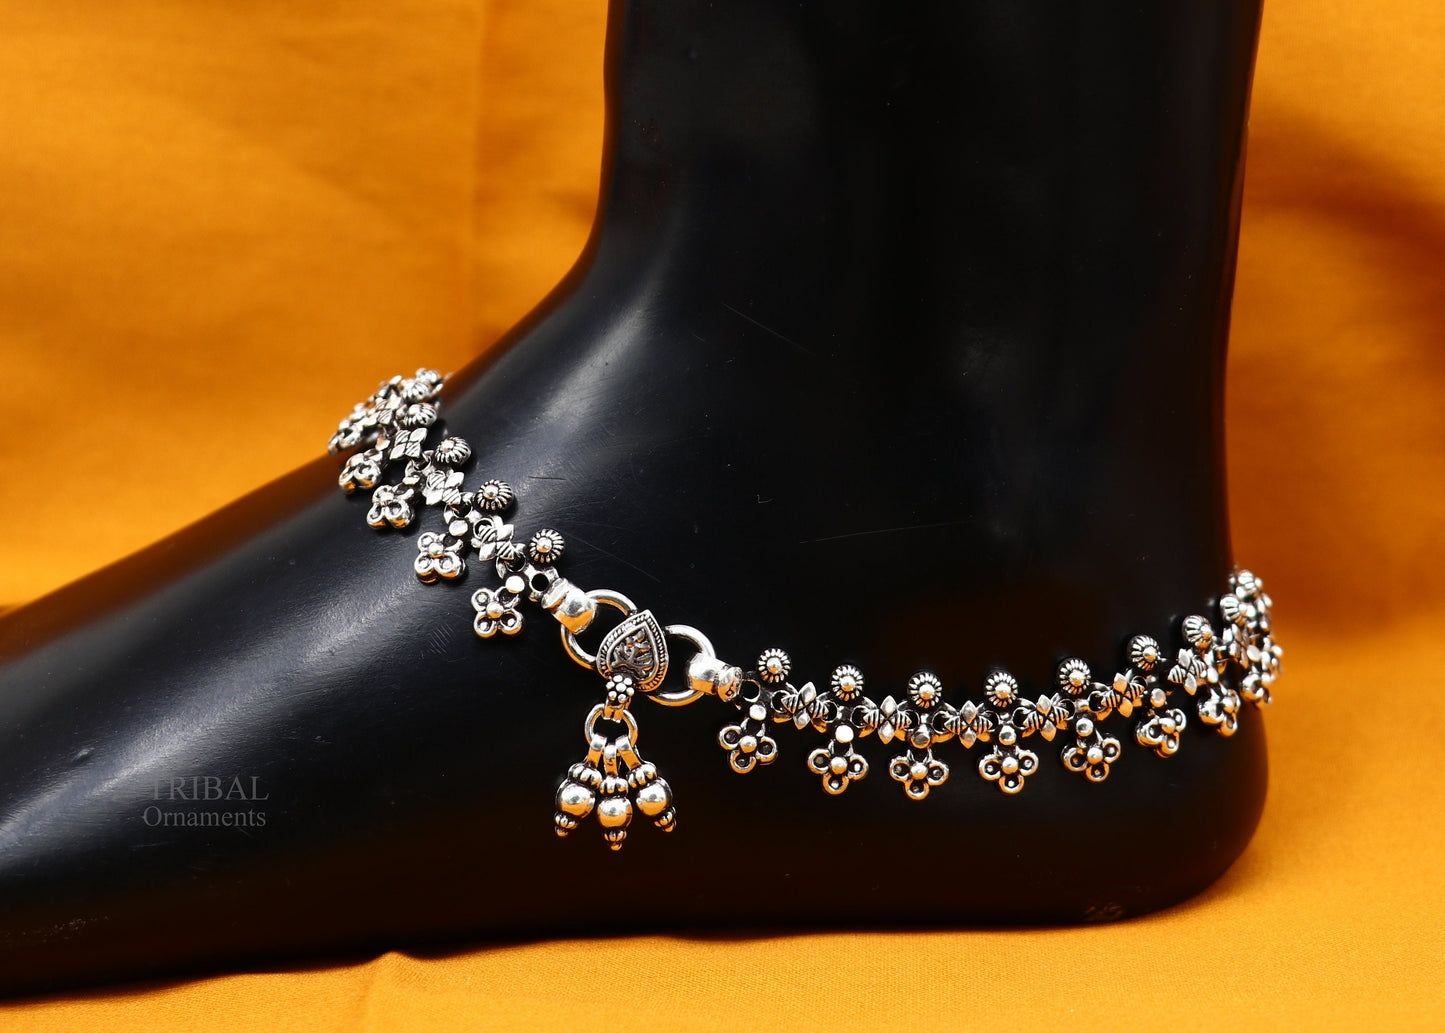 11 inches Handcrafted 925 solid silver anklet feet bracelet gorgeous hanging bells antique design tribal wedding belly dance jewelry Ank24 - TRIBAL ORNAMENTS